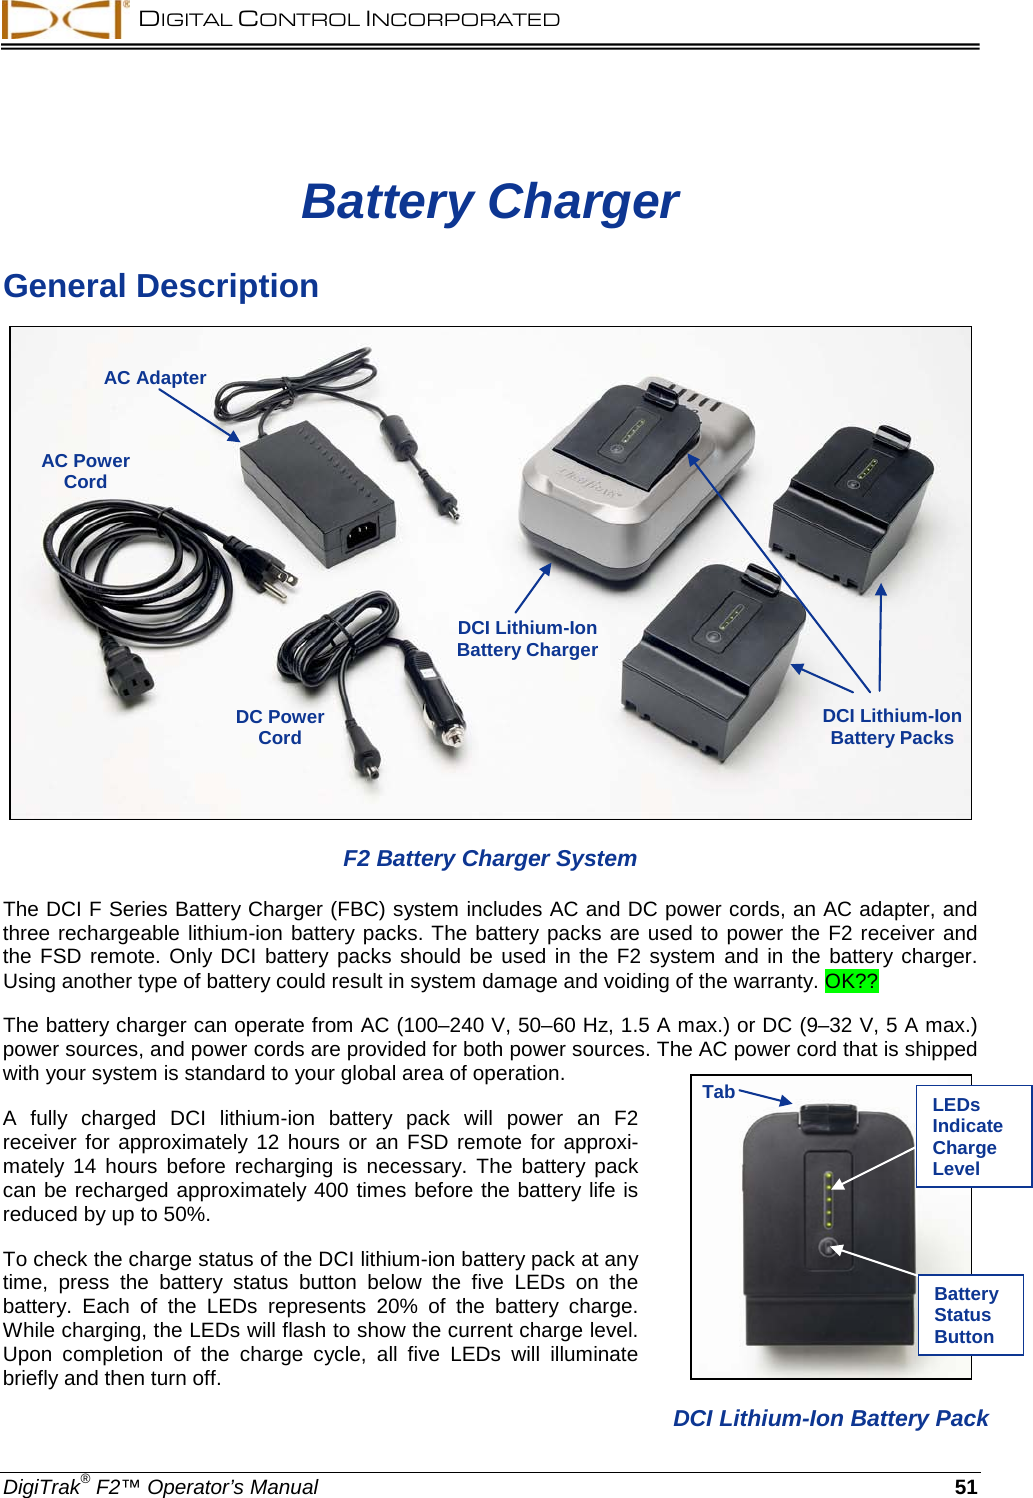  DIGITAL CONTROL INCORPORATED  DigiTrak® F2™ Operator’s Manual 51 Battery Charger General Description  F2 Battery Charger System The DCI F Series Battery Charger (FBC) system includes AC and DC power cords, an AC adapter, and three rechargeable lithium-ion battery packs. The battery packs are used to power the F2 receiver and the FSD remote. Only DCI battery packs should be used in the F2 system and in the battery charger. Using another type of battery could result in system damage and voiding of the warranty. OK?? The battery charger can operate from AC (100–240 V, 50–60 Hz, 1.5 A max.) or DC (9–32 V, 5 A max.) power sources, and power cords are provided for both power sources. The AC power cord that is shipped with your system is standard to your global area of operation. A fully charged DCI  lithium-ion battery pack will power an F2 receiver  for approximately 12 hours or an FSD remote for approxi-mately 14 hours before recharging is necessary.  The battery pack can be recharged approximately 400 times before the battery life is reduced by up to 50%. To check the charge status of the DCI lithium-ion battery pack at any time, press the battery status button below the five LEDs on the battery.  Each of the LEDs represents 20% of the battery charge. While charging, the LEDs will flash to show the current charge level. Upon  completion of the charge cycle, all five LEDs will illuminate briefly and then turn off.  AC Adapter AC Power Cord DCI Lithium-Ion Battery Charger DCI Lithium-Ion Battery Packs  DC Power Cord   DCI Lithium-Ion Battery Pack Tab LEDs Indicate Charge Level Battery Status Button 